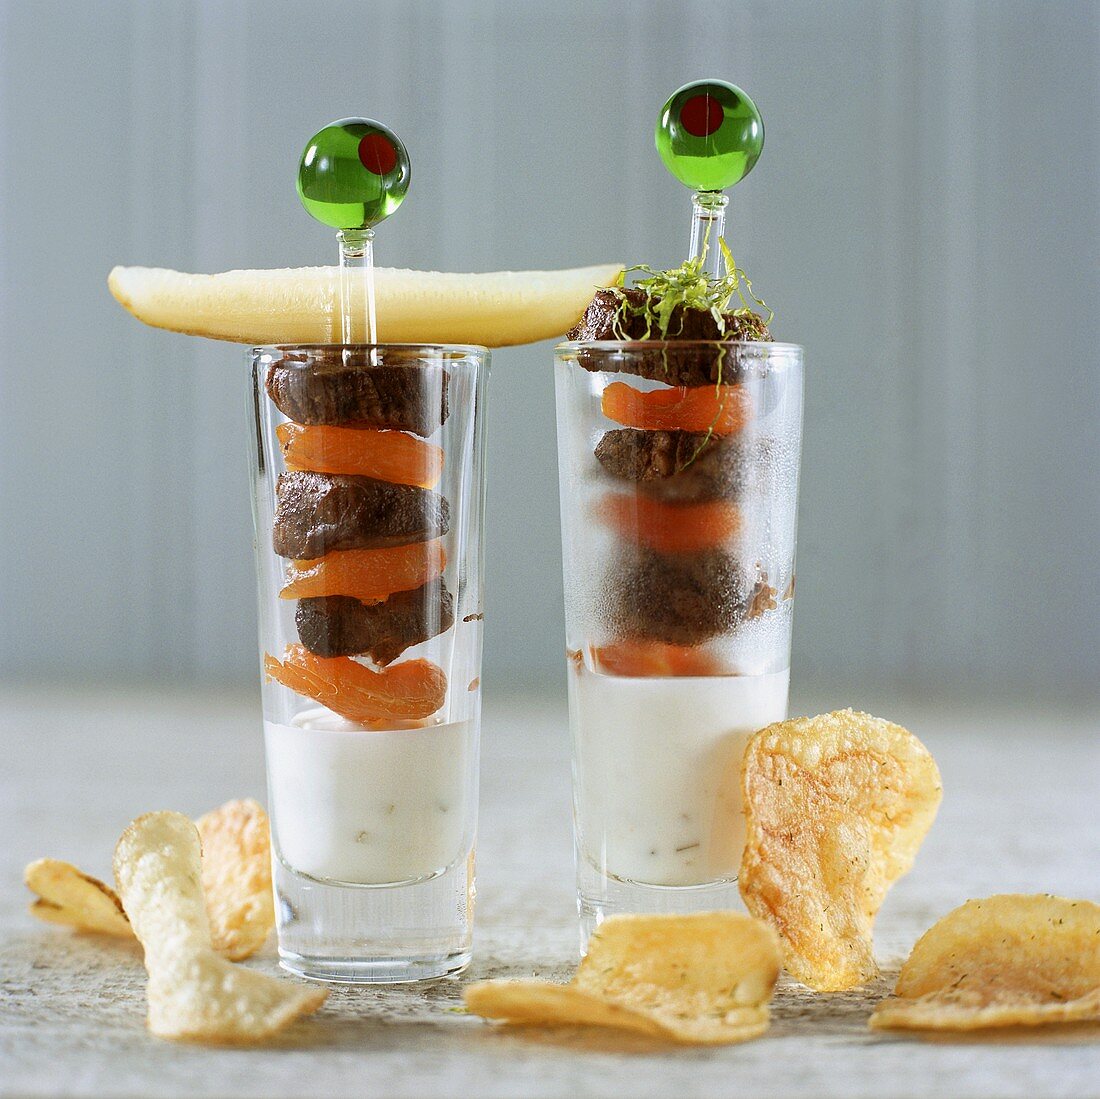 Skewered meat and apricots on yoghurt dip